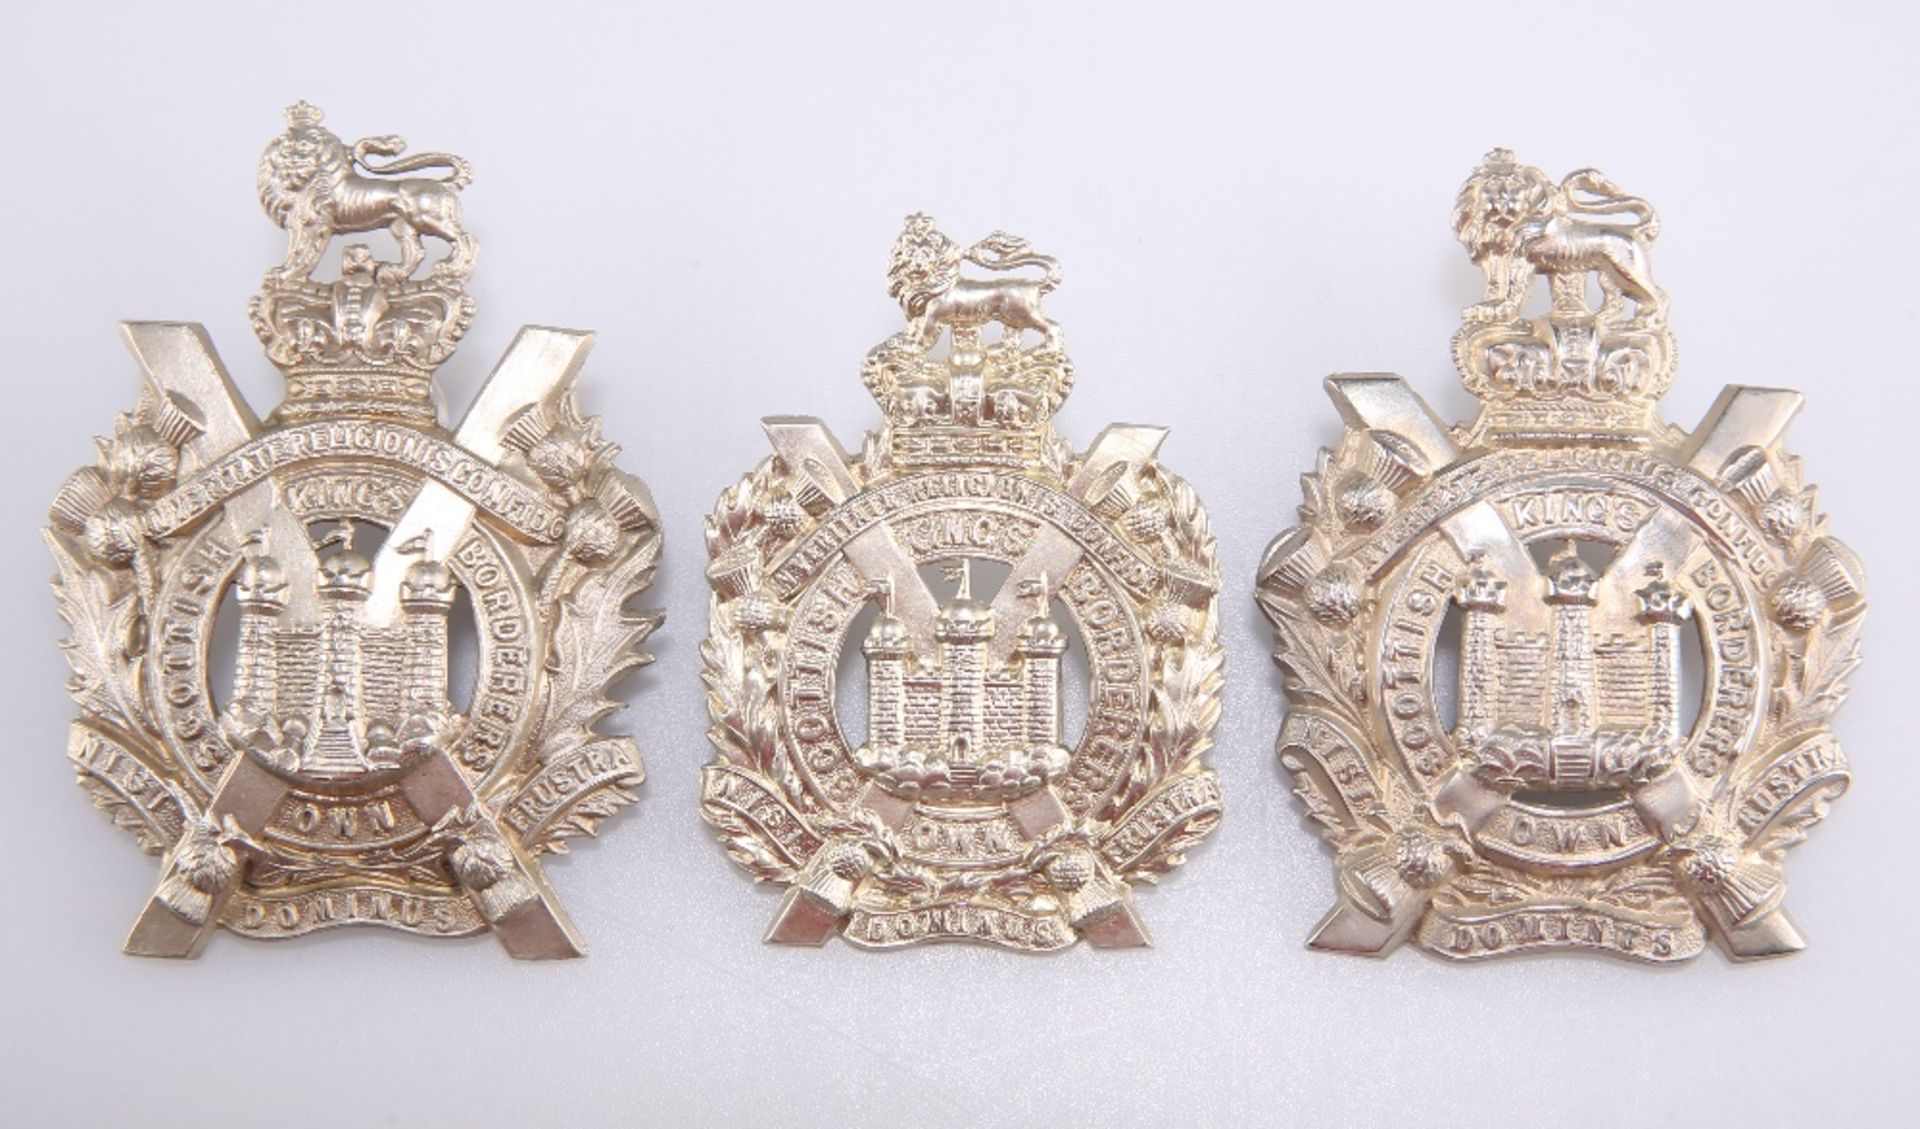 THREE EXAMPLES OF THE PRE 1902 OTHER RANKS' PATTERN GLENGARRY BADGE KOSB